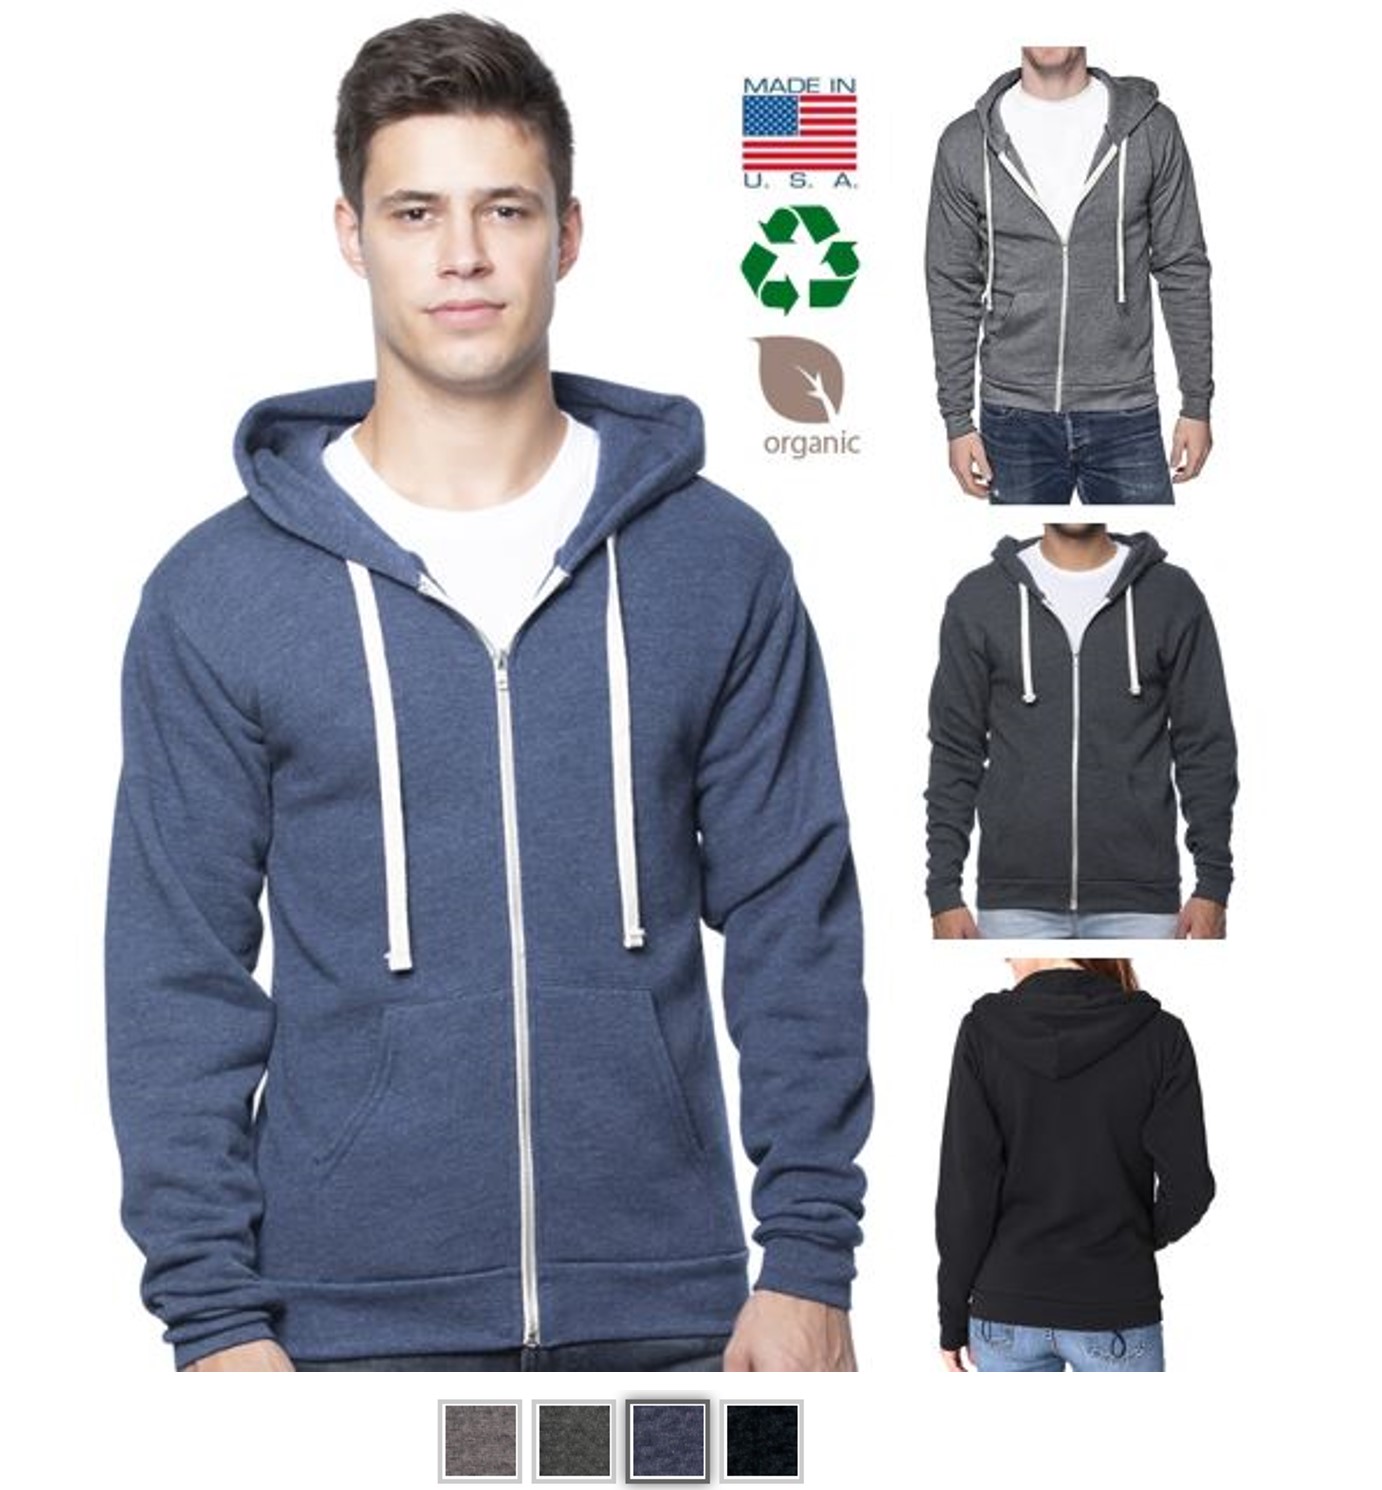 Full zip hoodie USA made recycled organic french terry